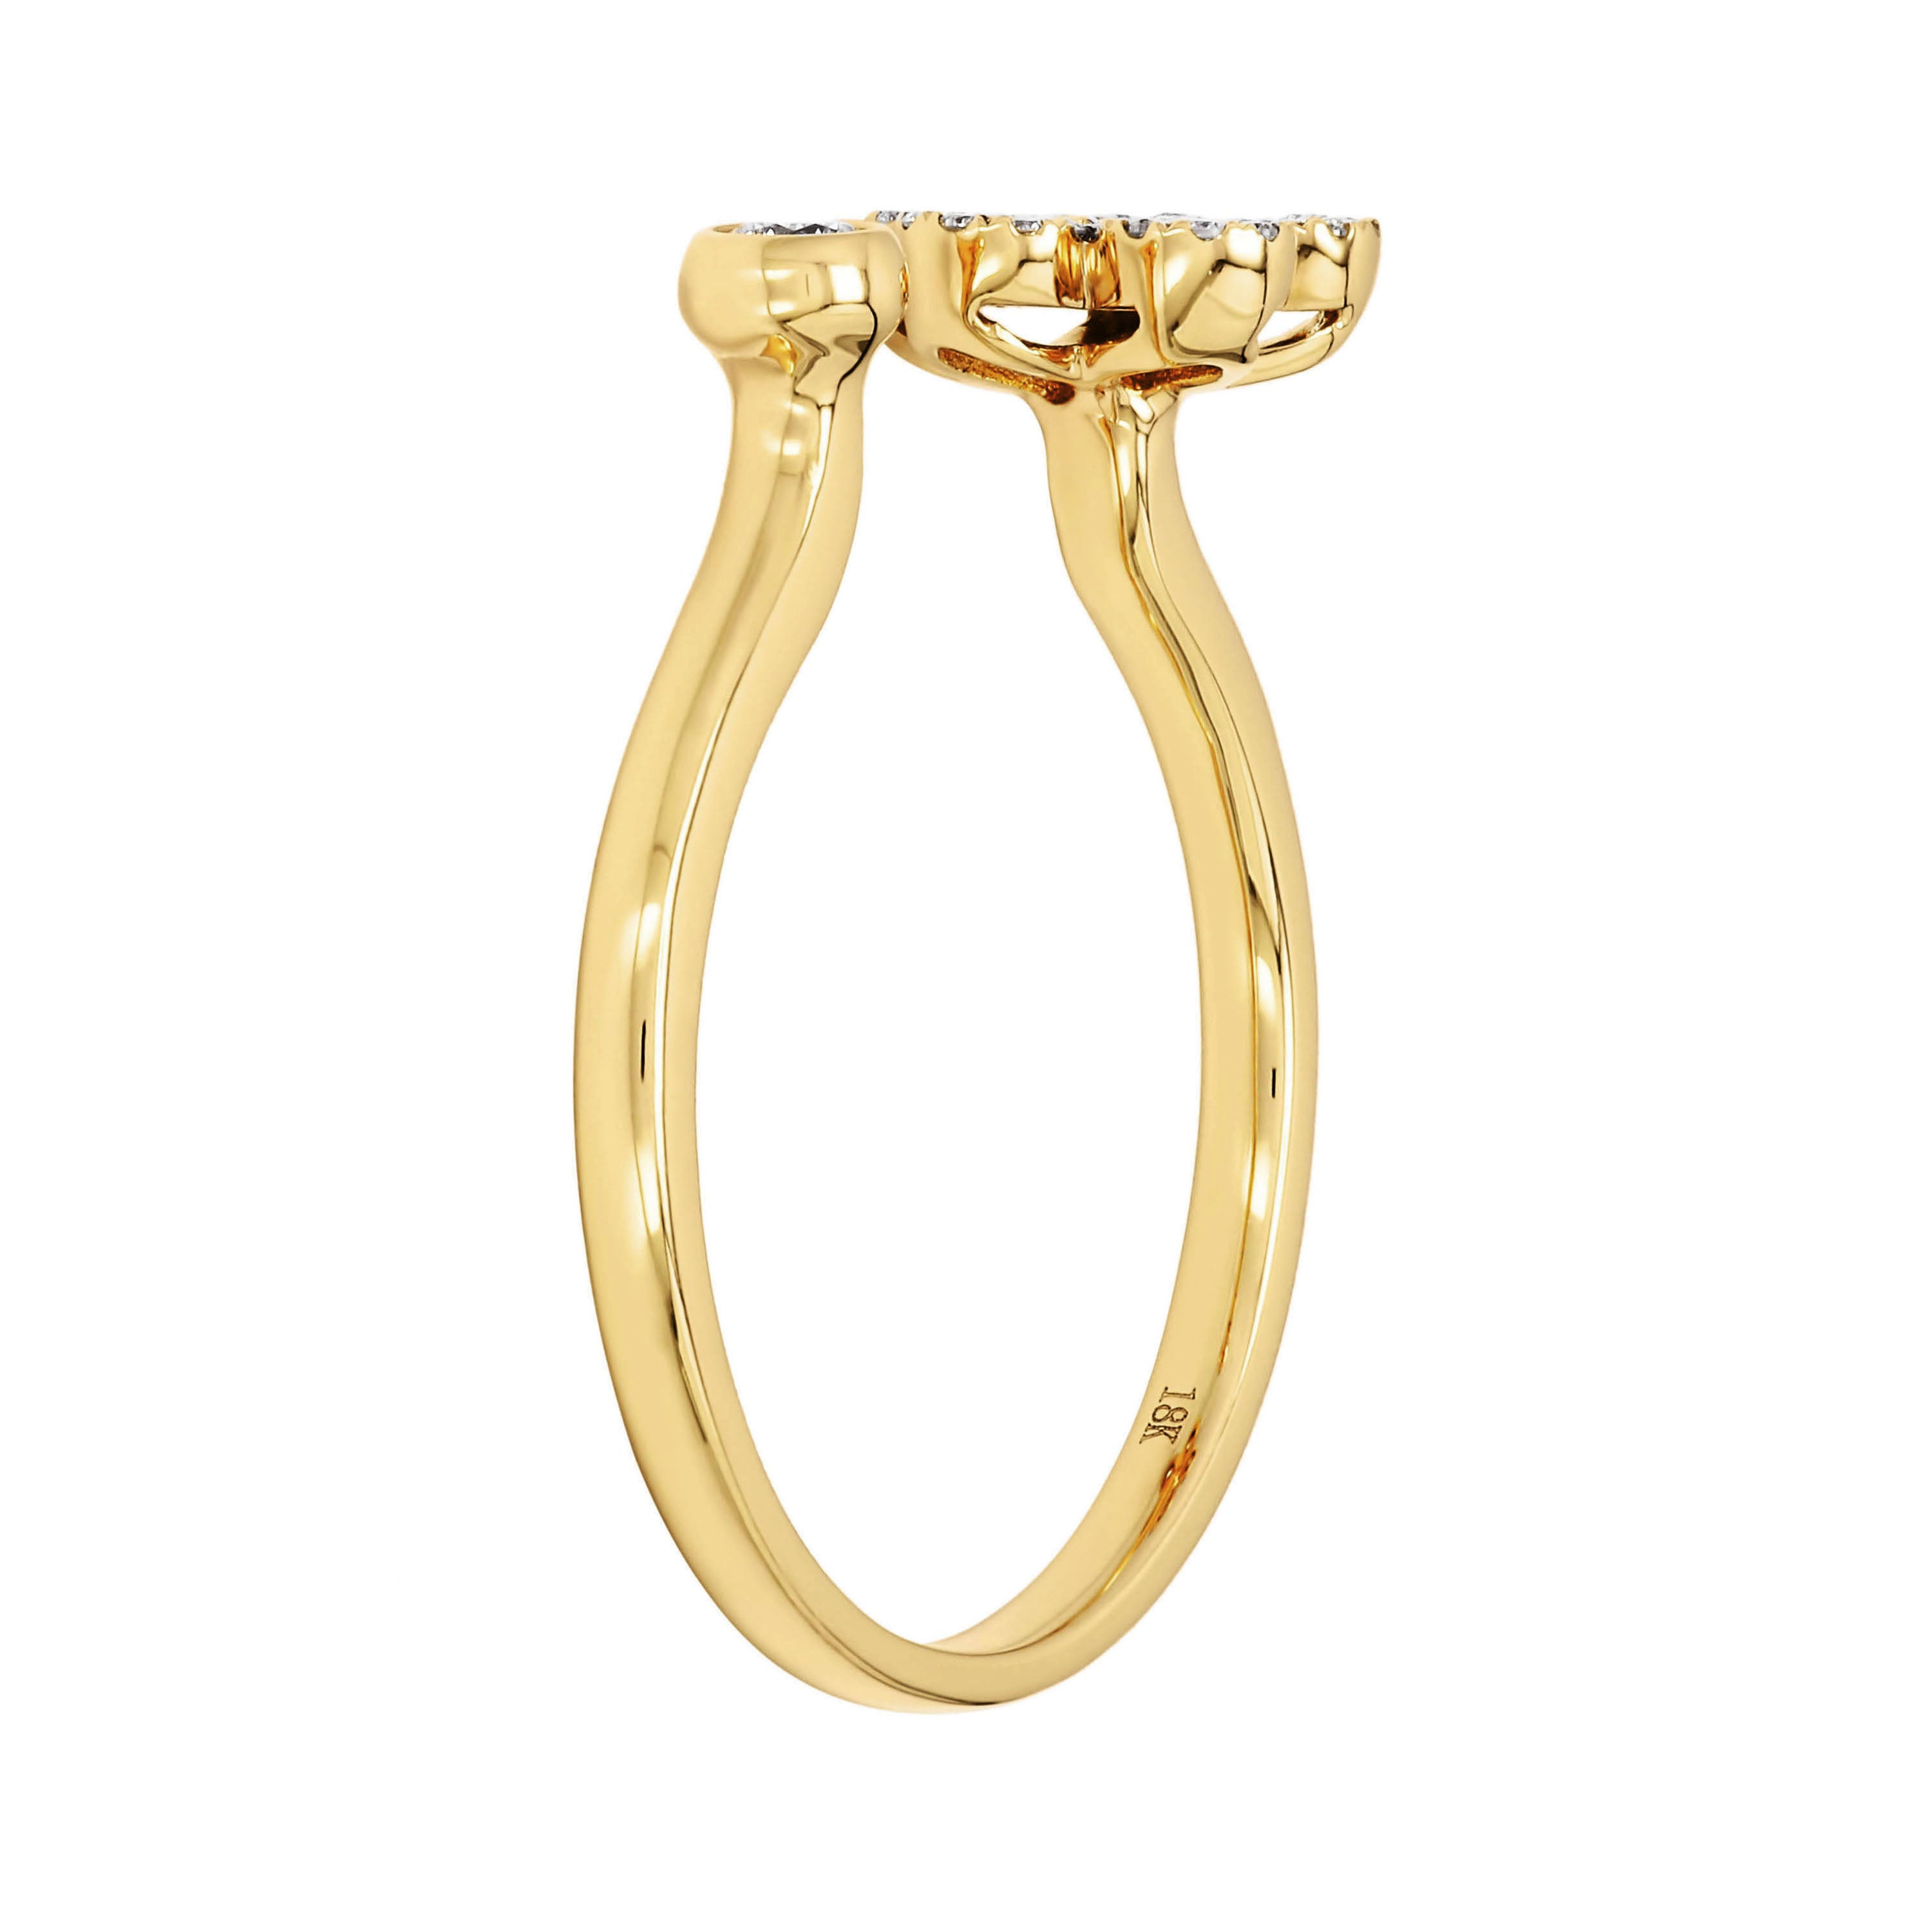 Adamar Jewels Floral Open Ring in 18K yellow gold set with diamonds